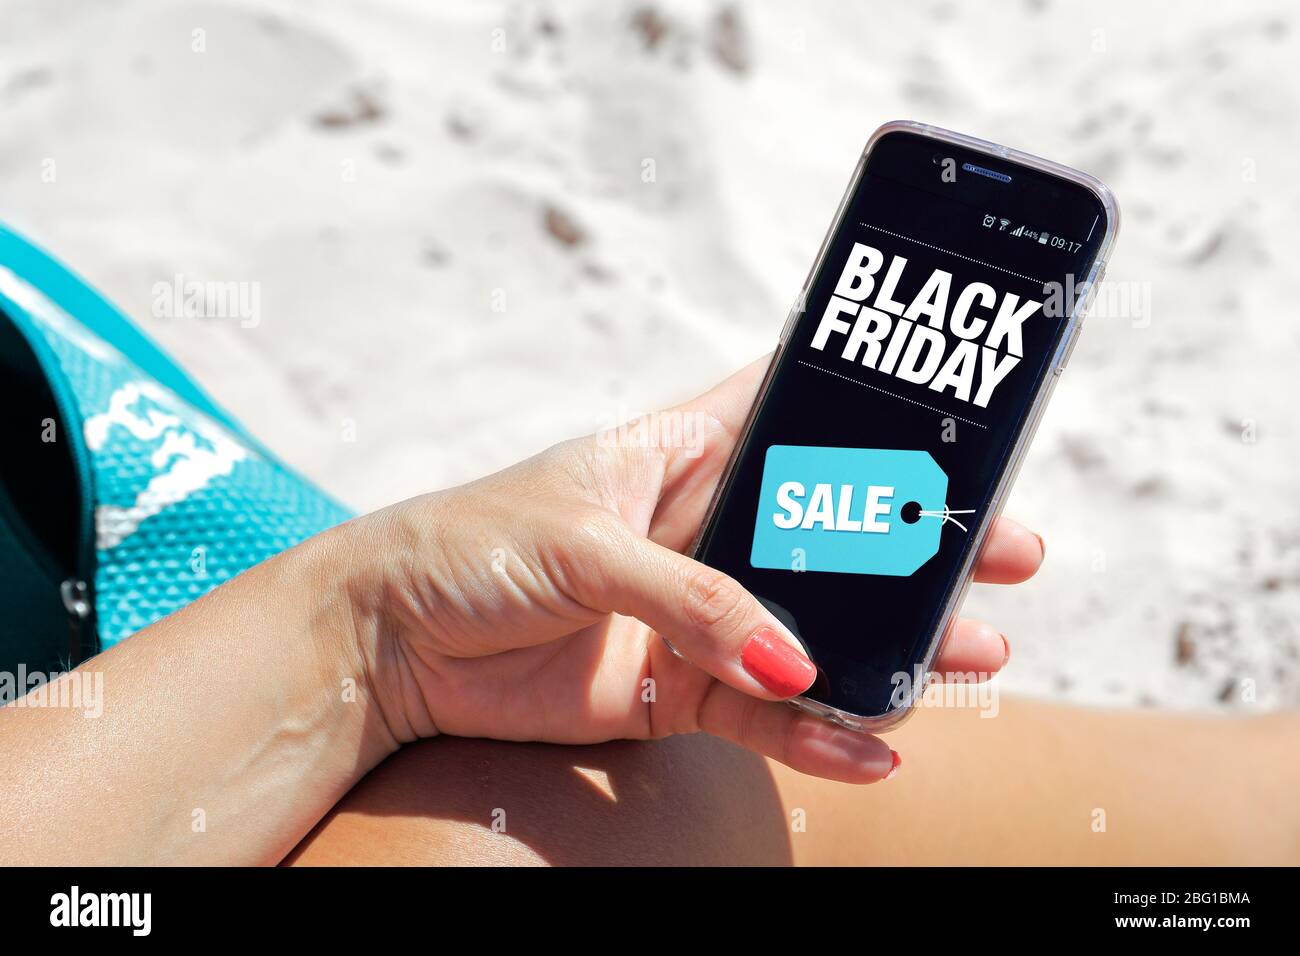 Woman on the beach with a cell phone in her hands. You can see a Black Friday advertising on the screen. Marketing, ecommerce, cell phone publicity. Stock Photo